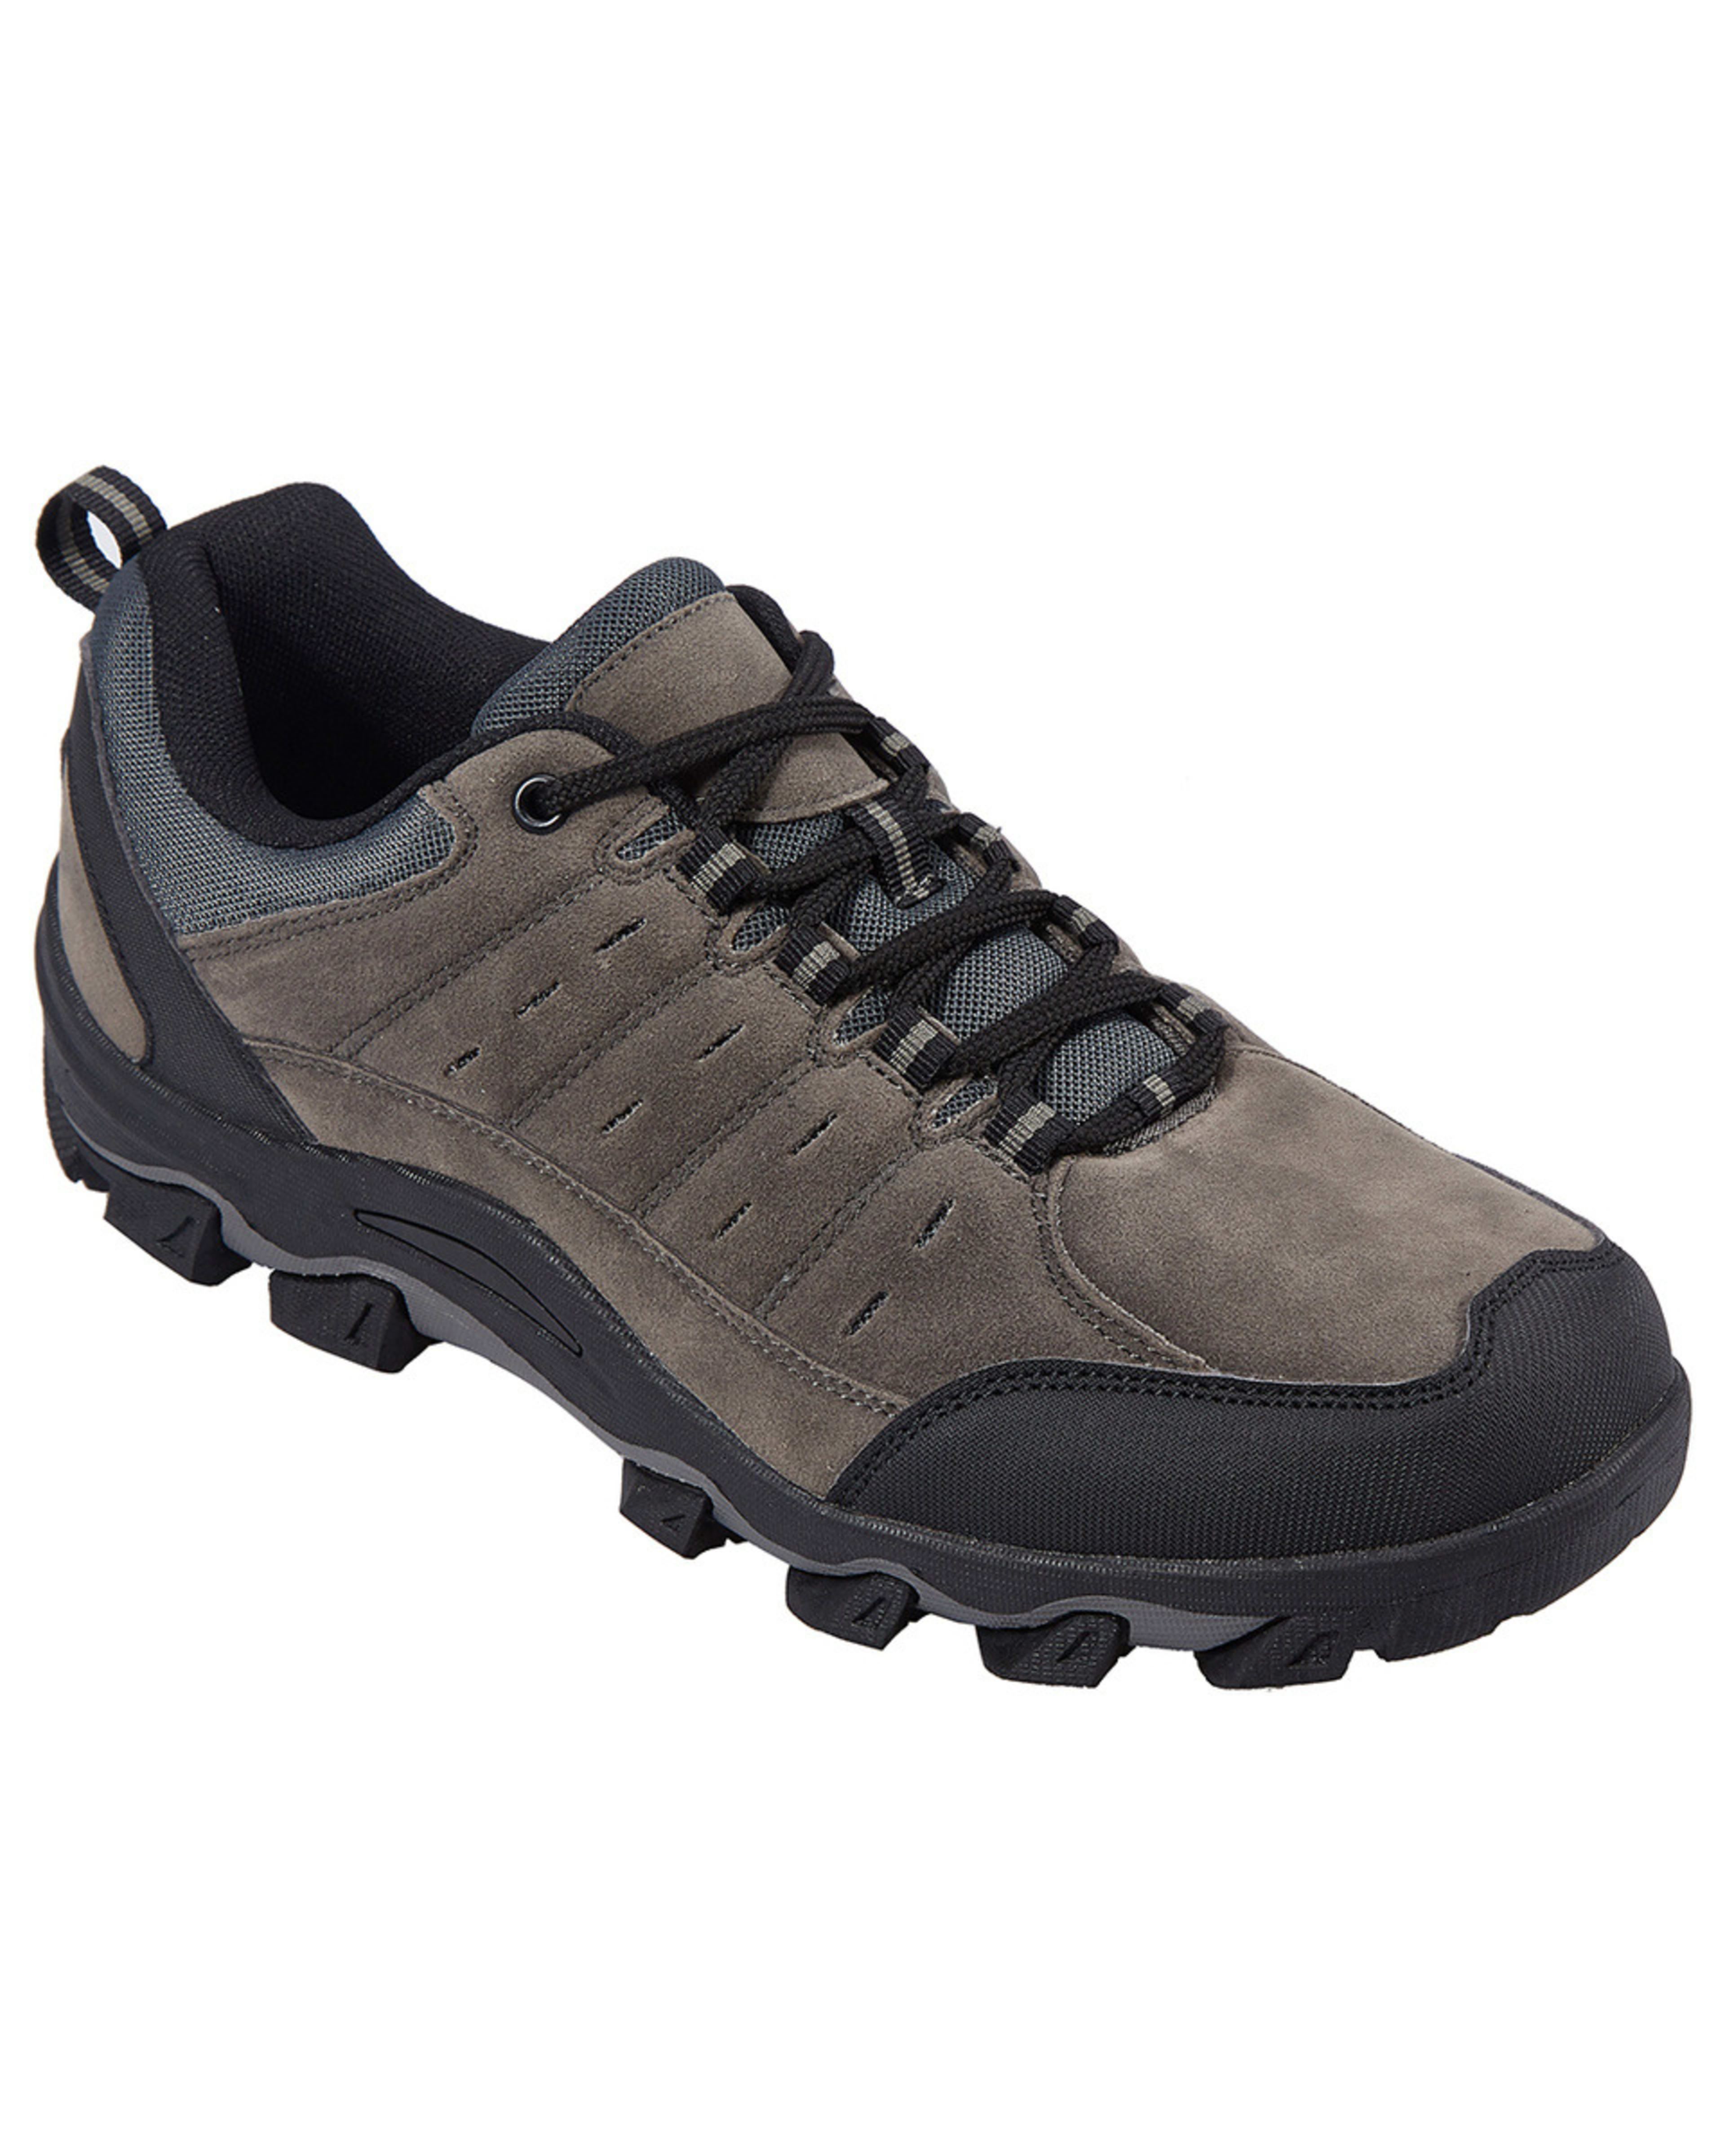 Active Performance Hiking Shoes - Kmart